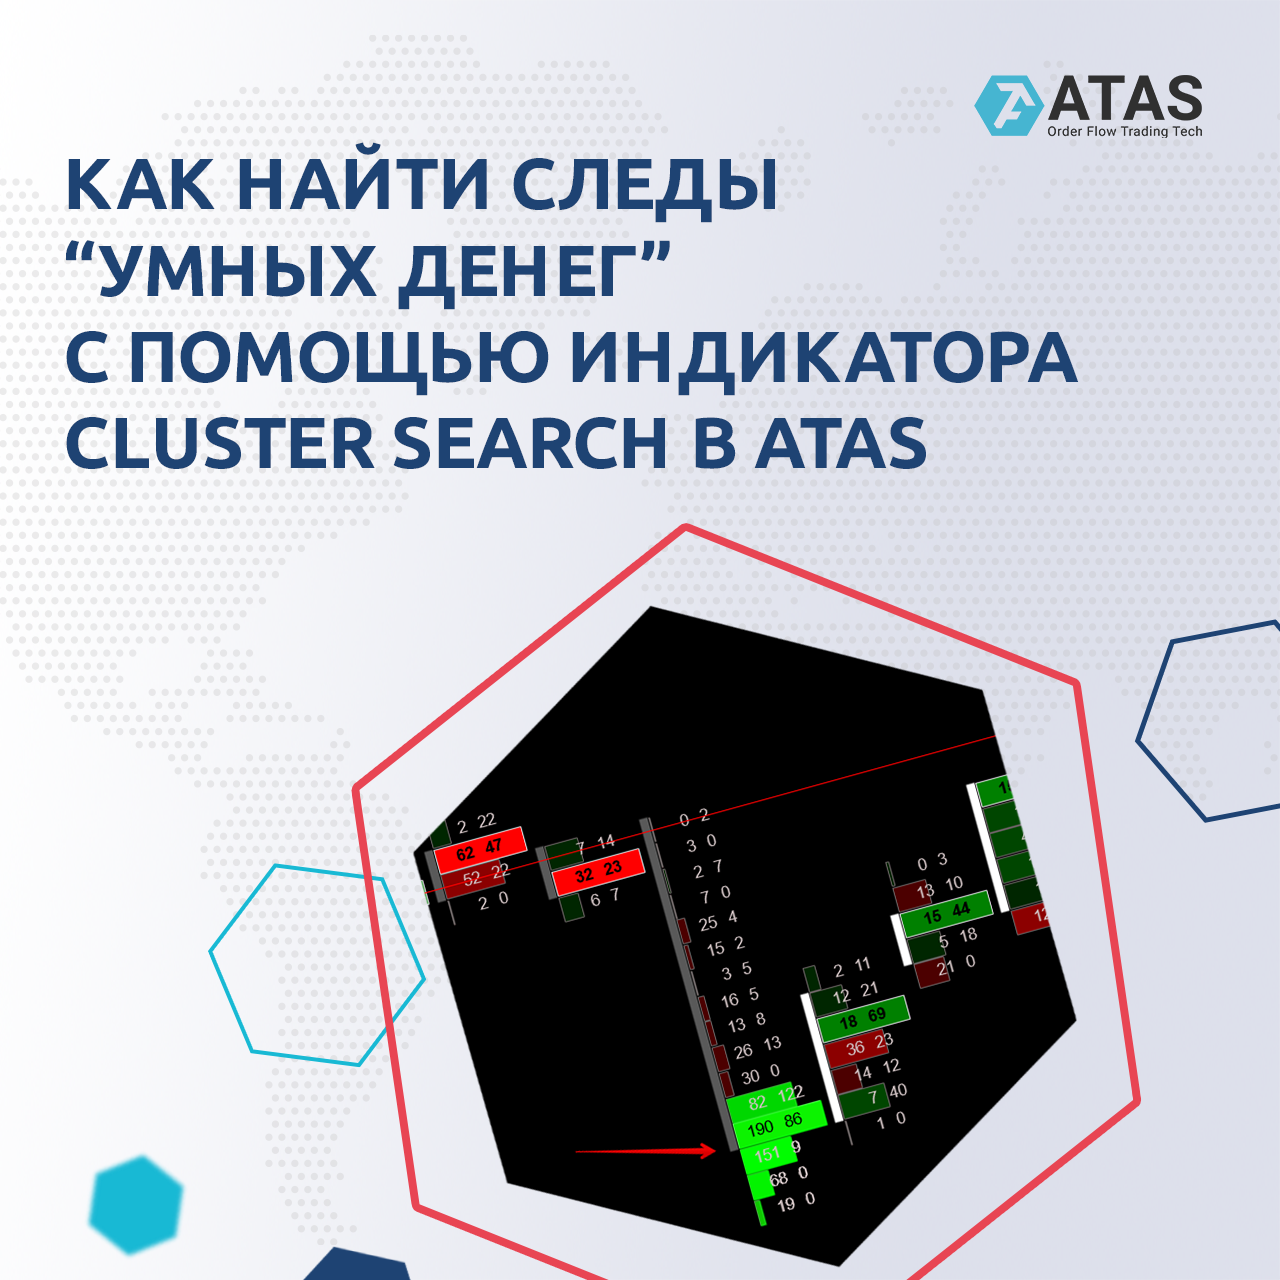 Cluster search